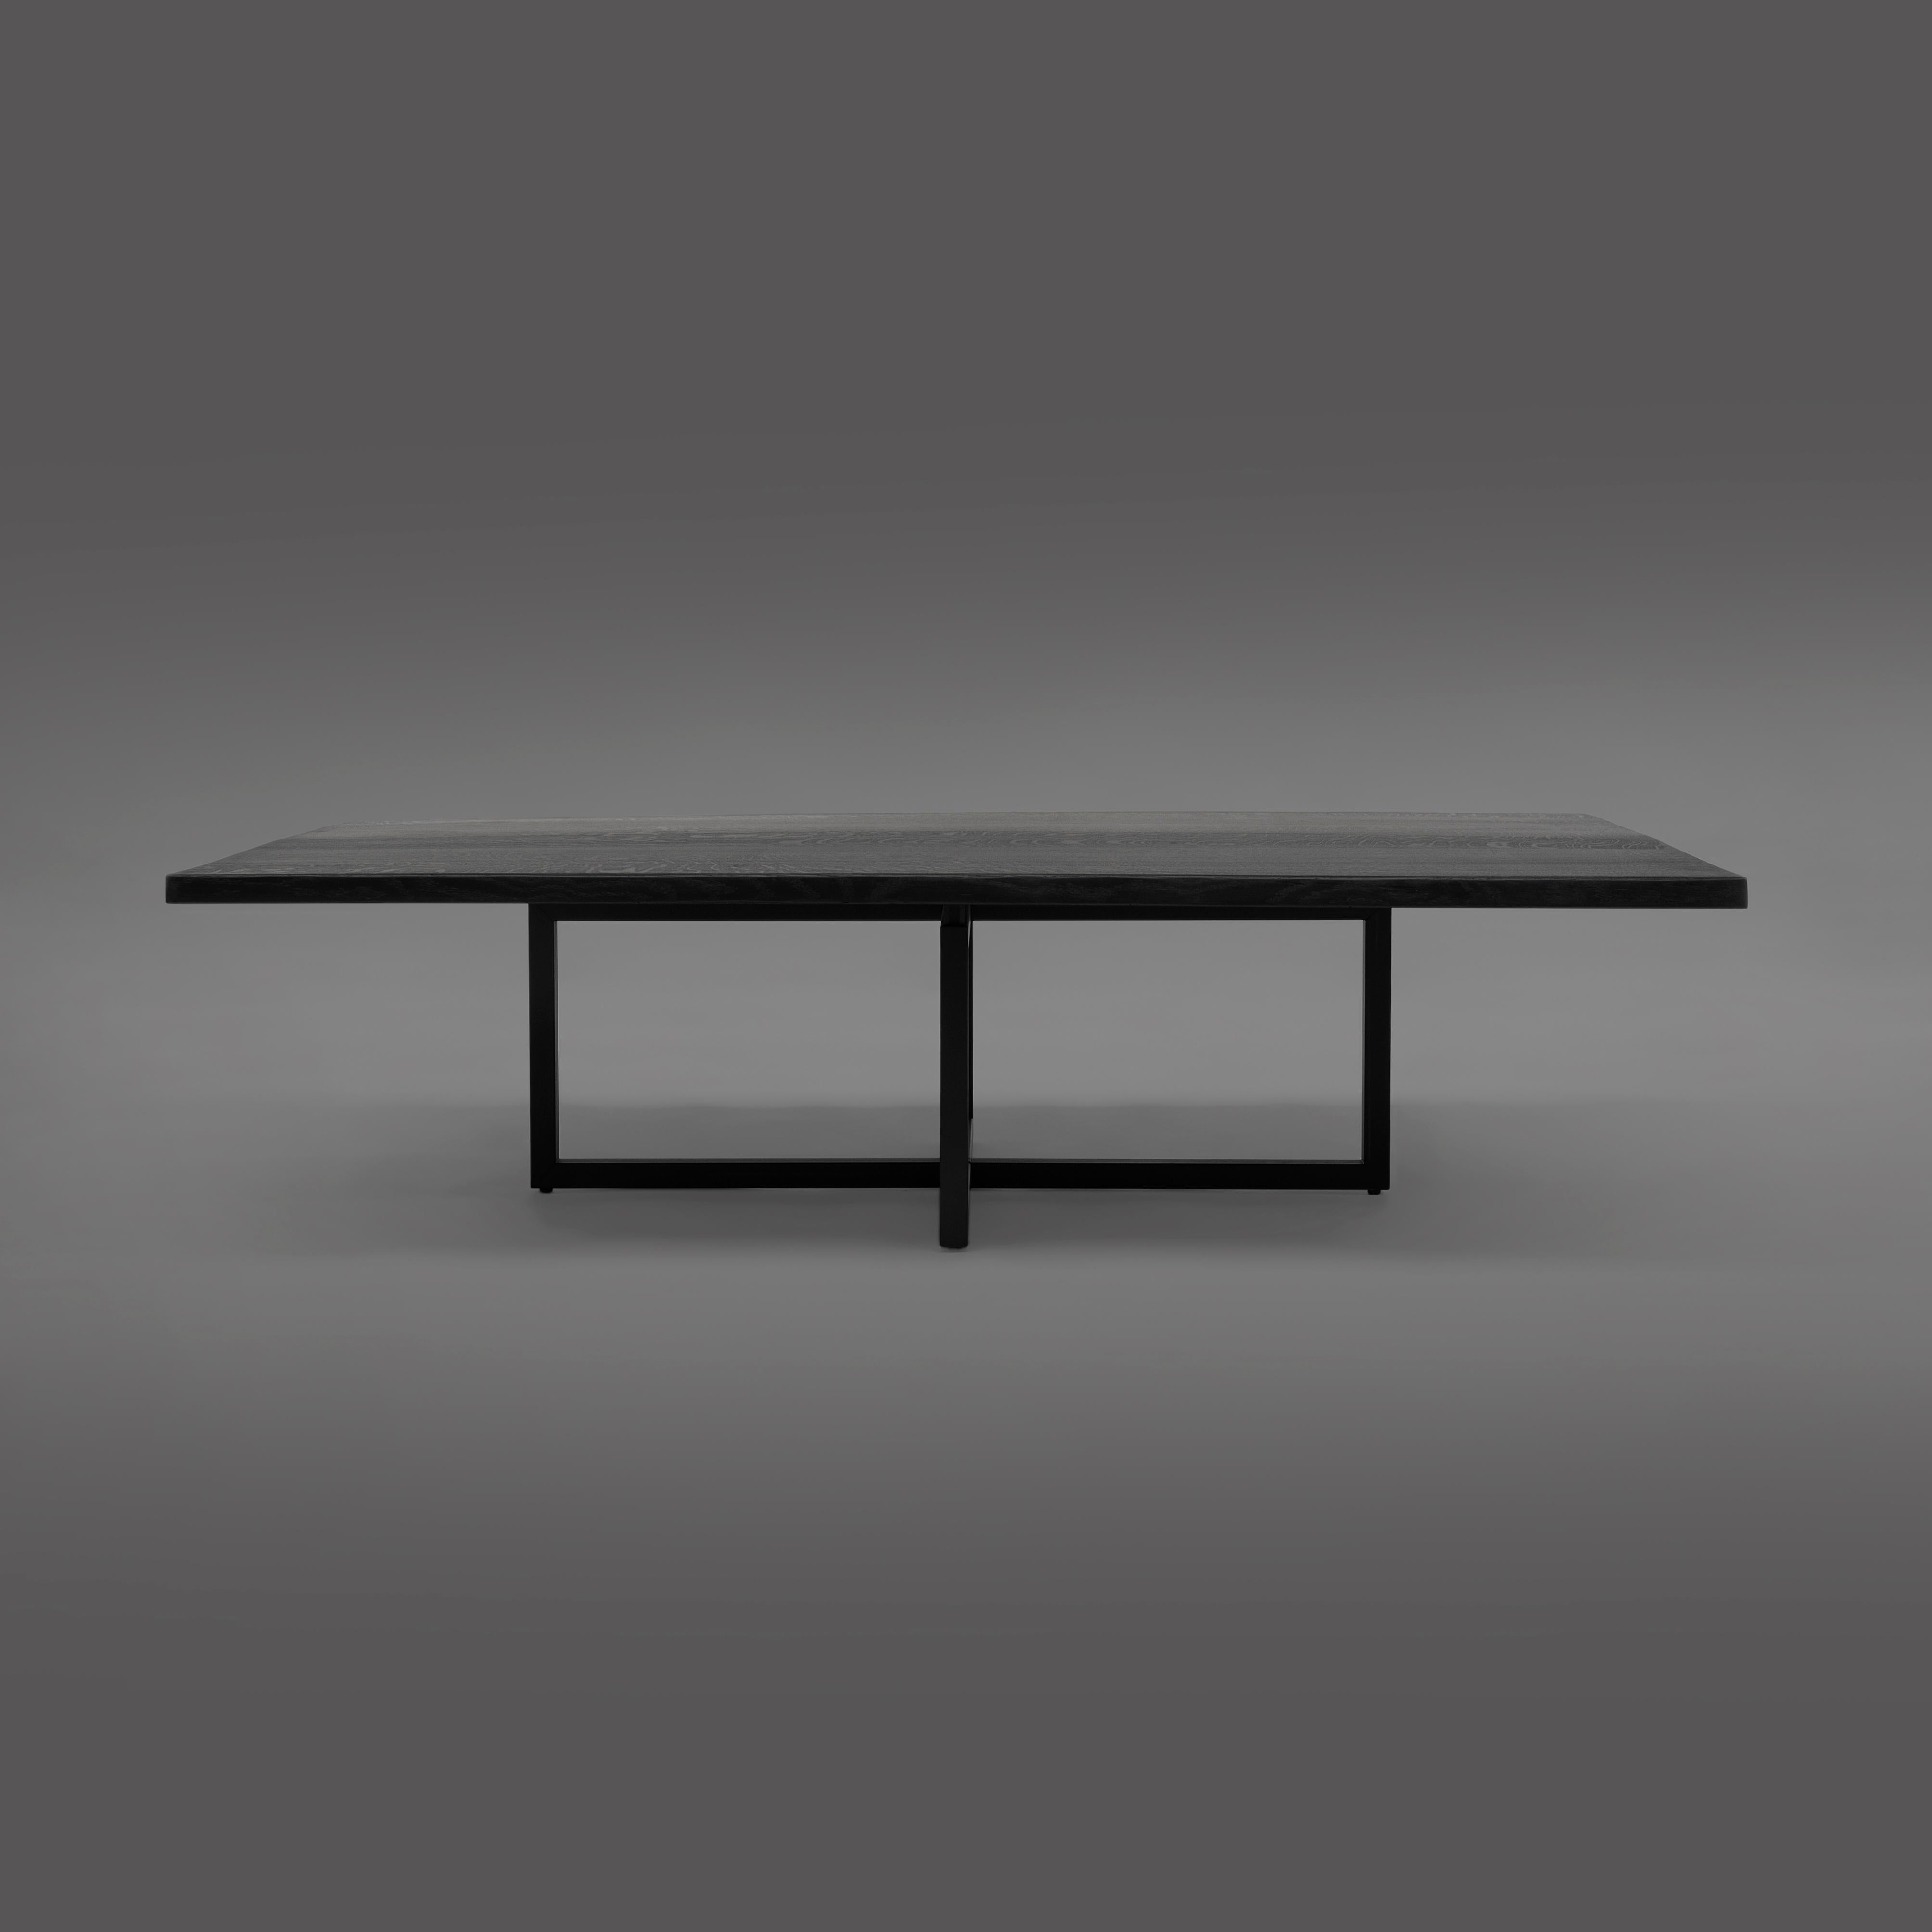 Coffee table designed by Peter Ghyczy.
Manufactured by Ghyczy (Netherlands)

Intersecting frames, connected by cast metal elements, create the structure for this very rigid table frame. Suitable for a wide range of tables; co ee table, console